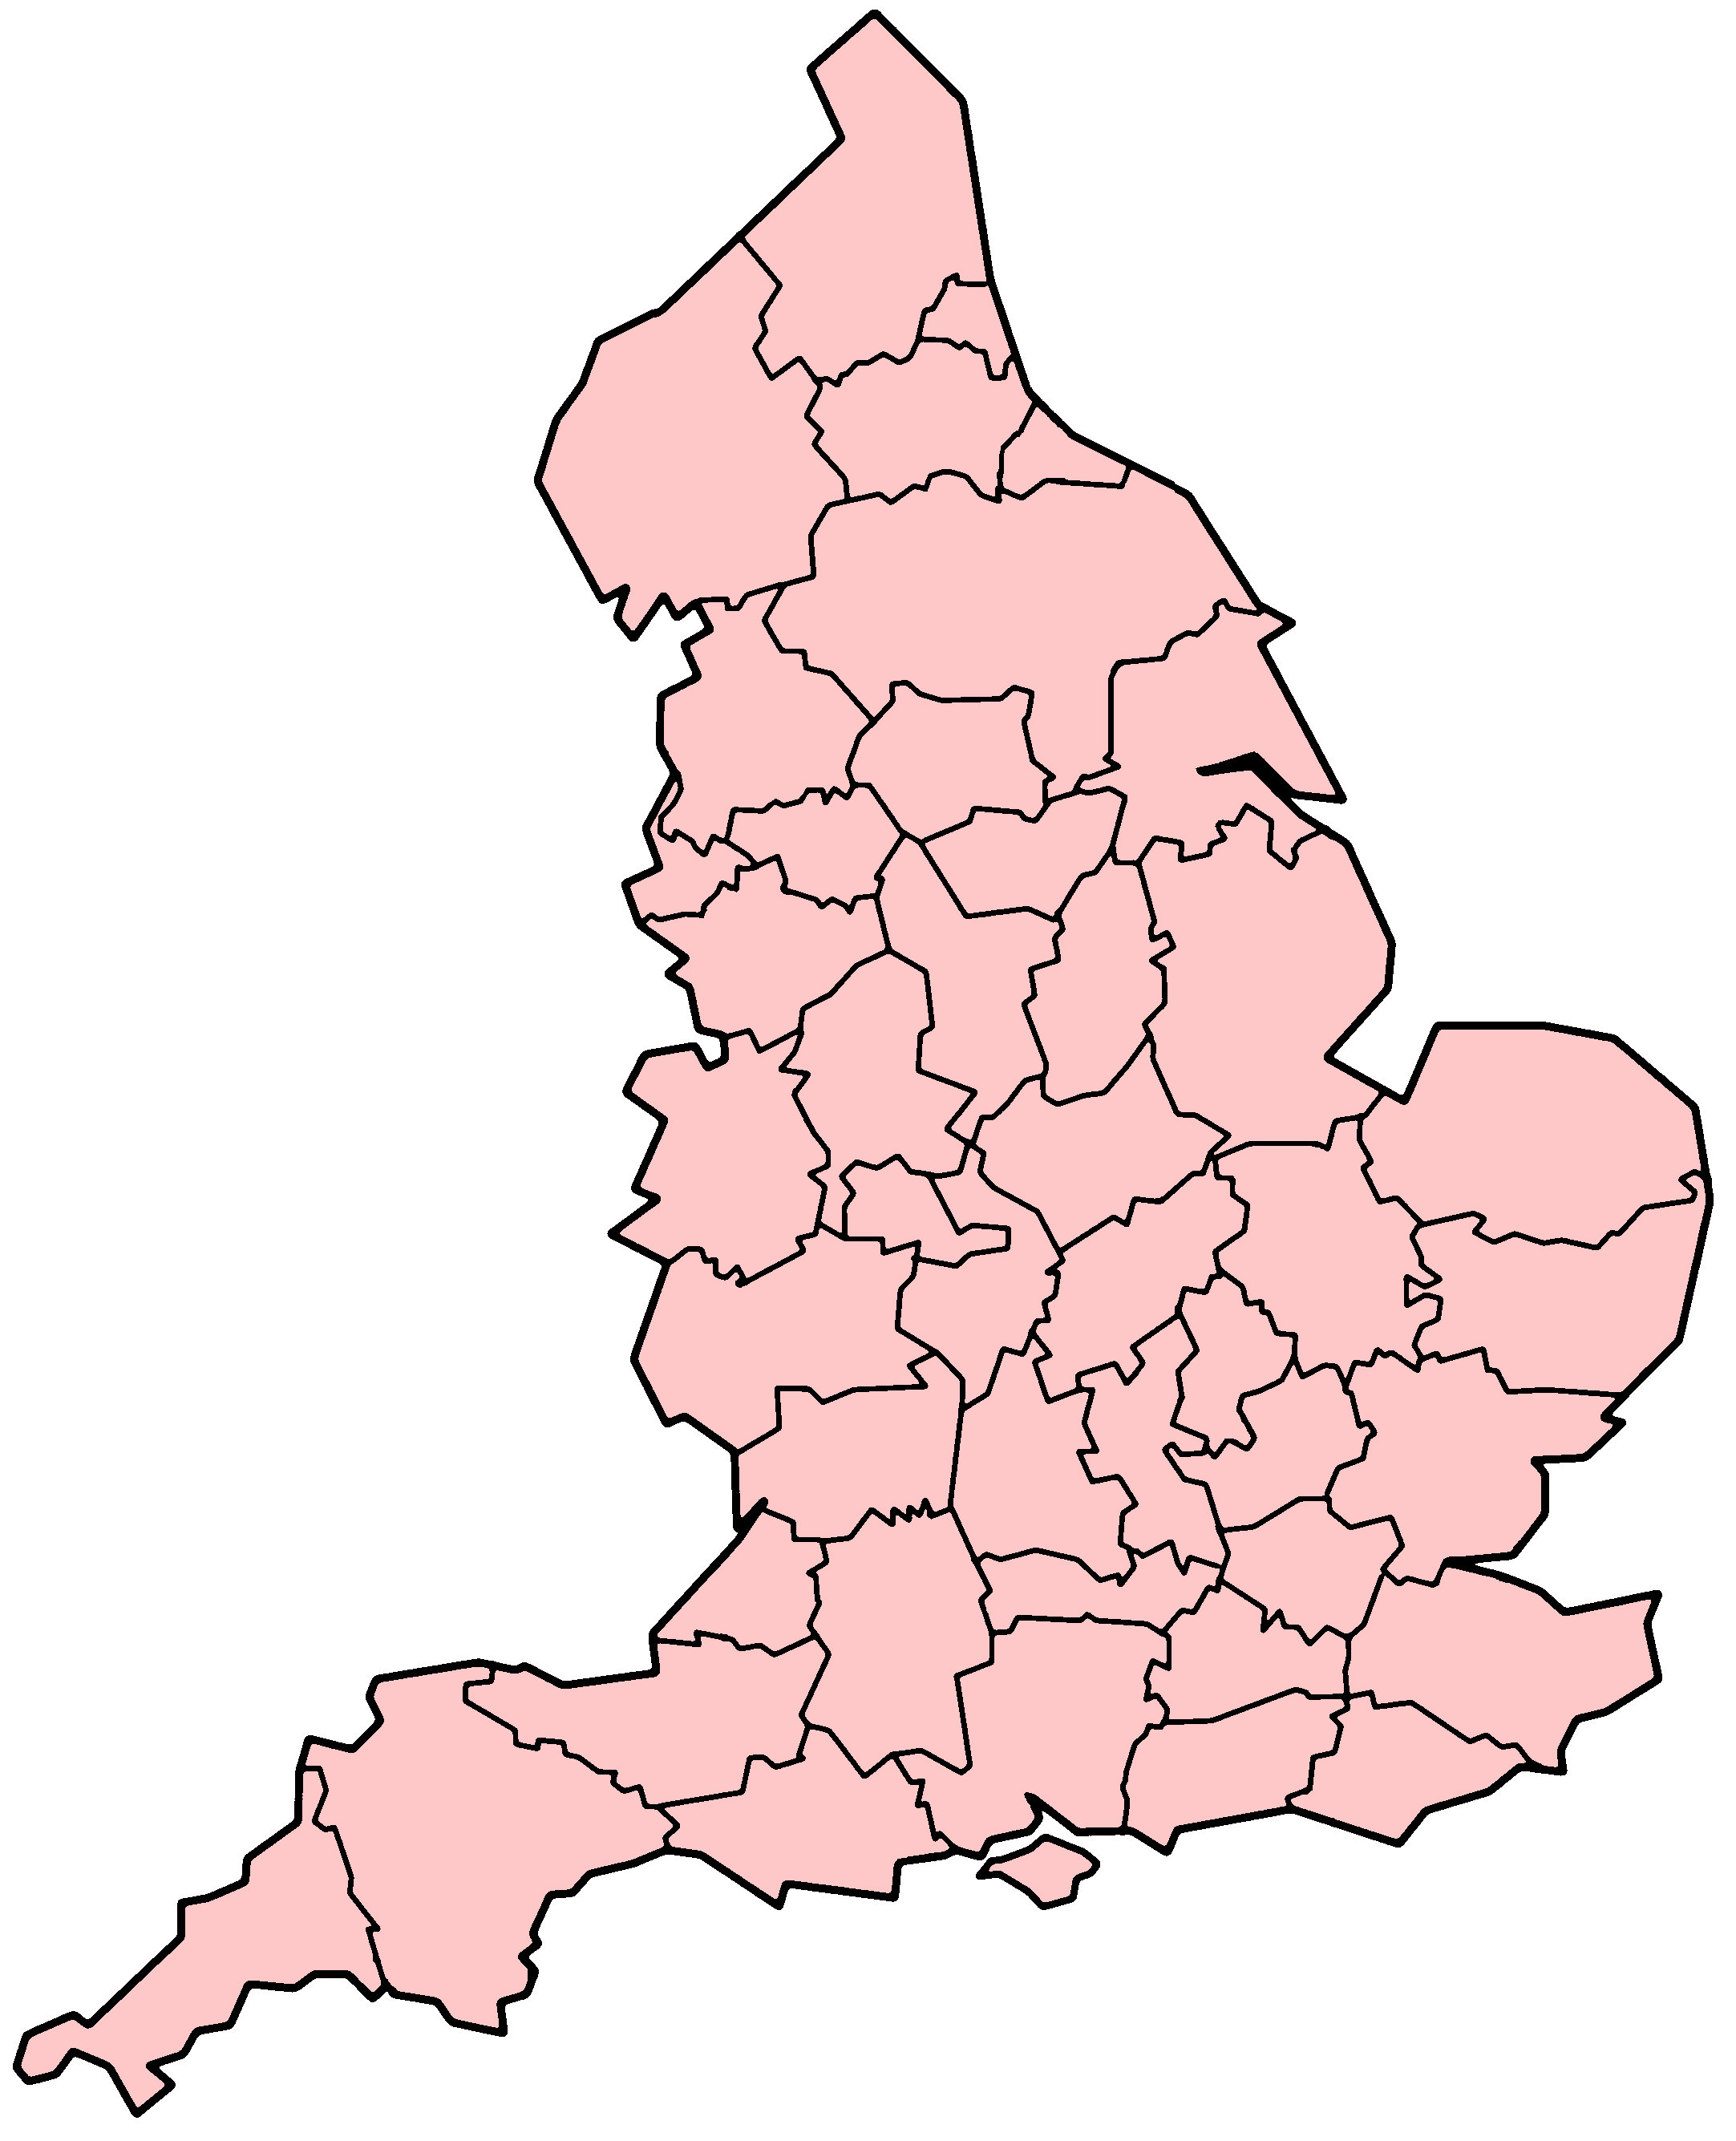 counties-of-england